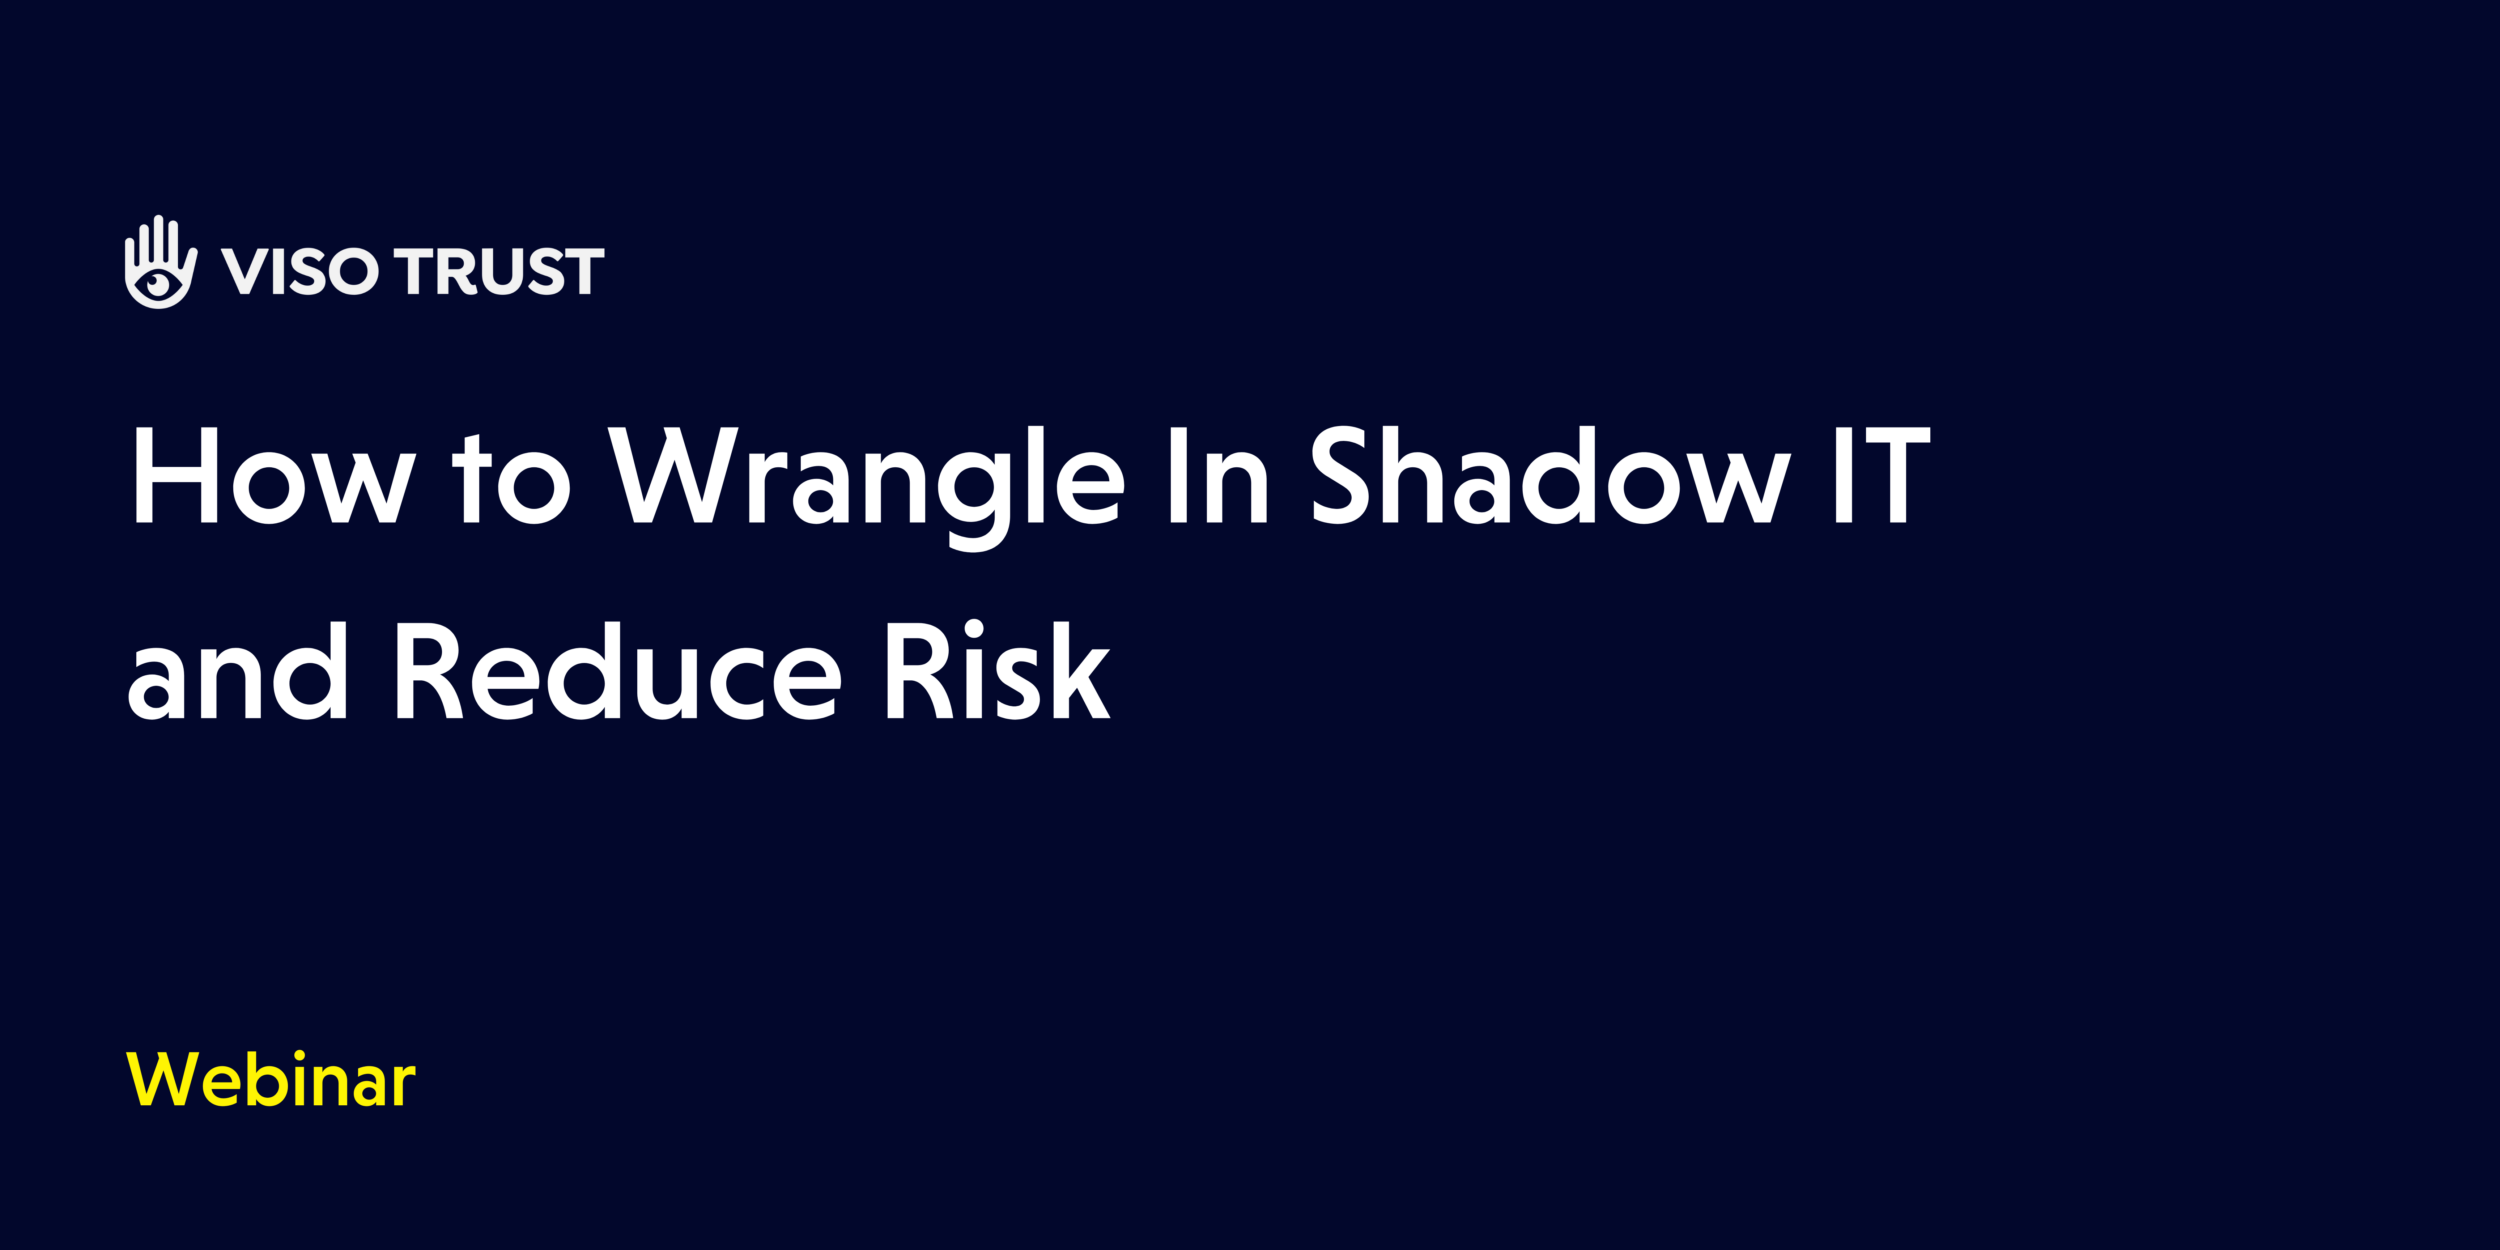 Webinar Panel: How to Wrangle In Shadow IT & Reduce Risk 8